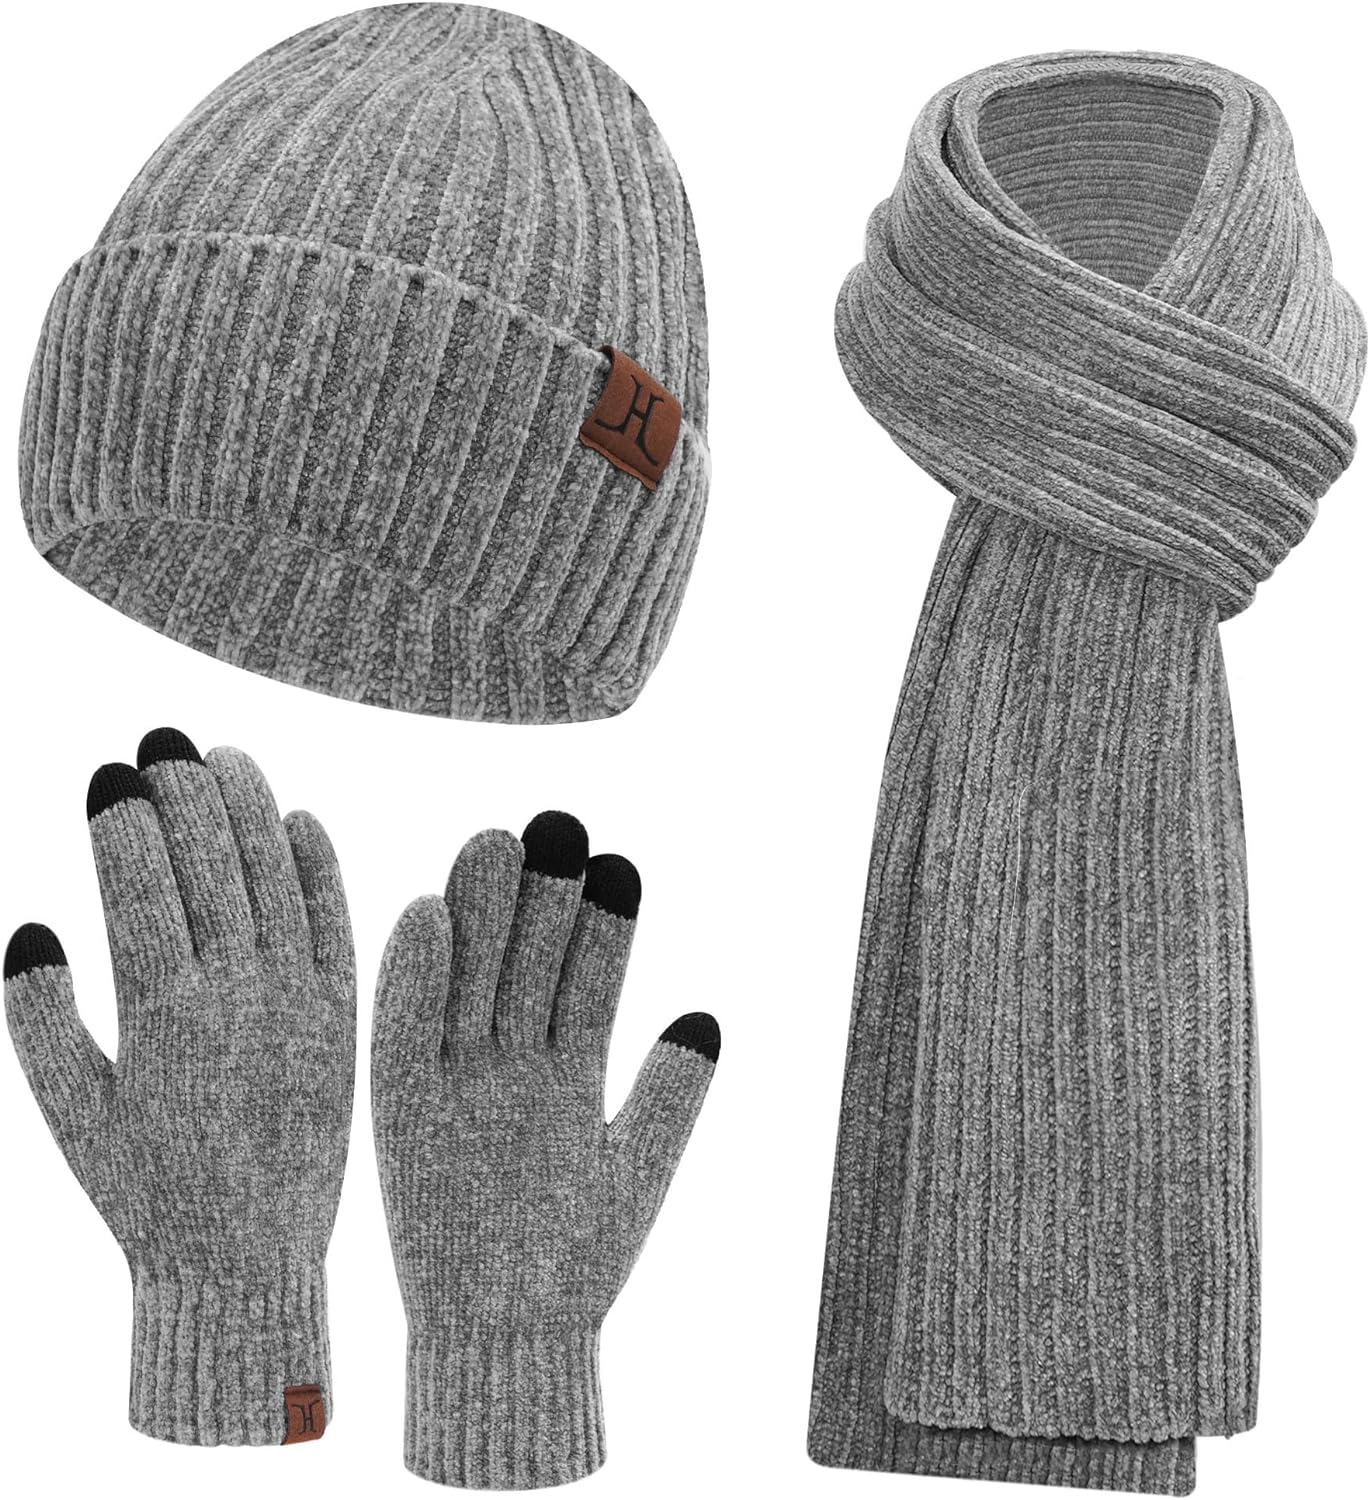 Limited-Time Discounts! Get Your Womens Winter Knit Warm Hat Beanie Long Scarf Touch Screen Gloves Set Now!